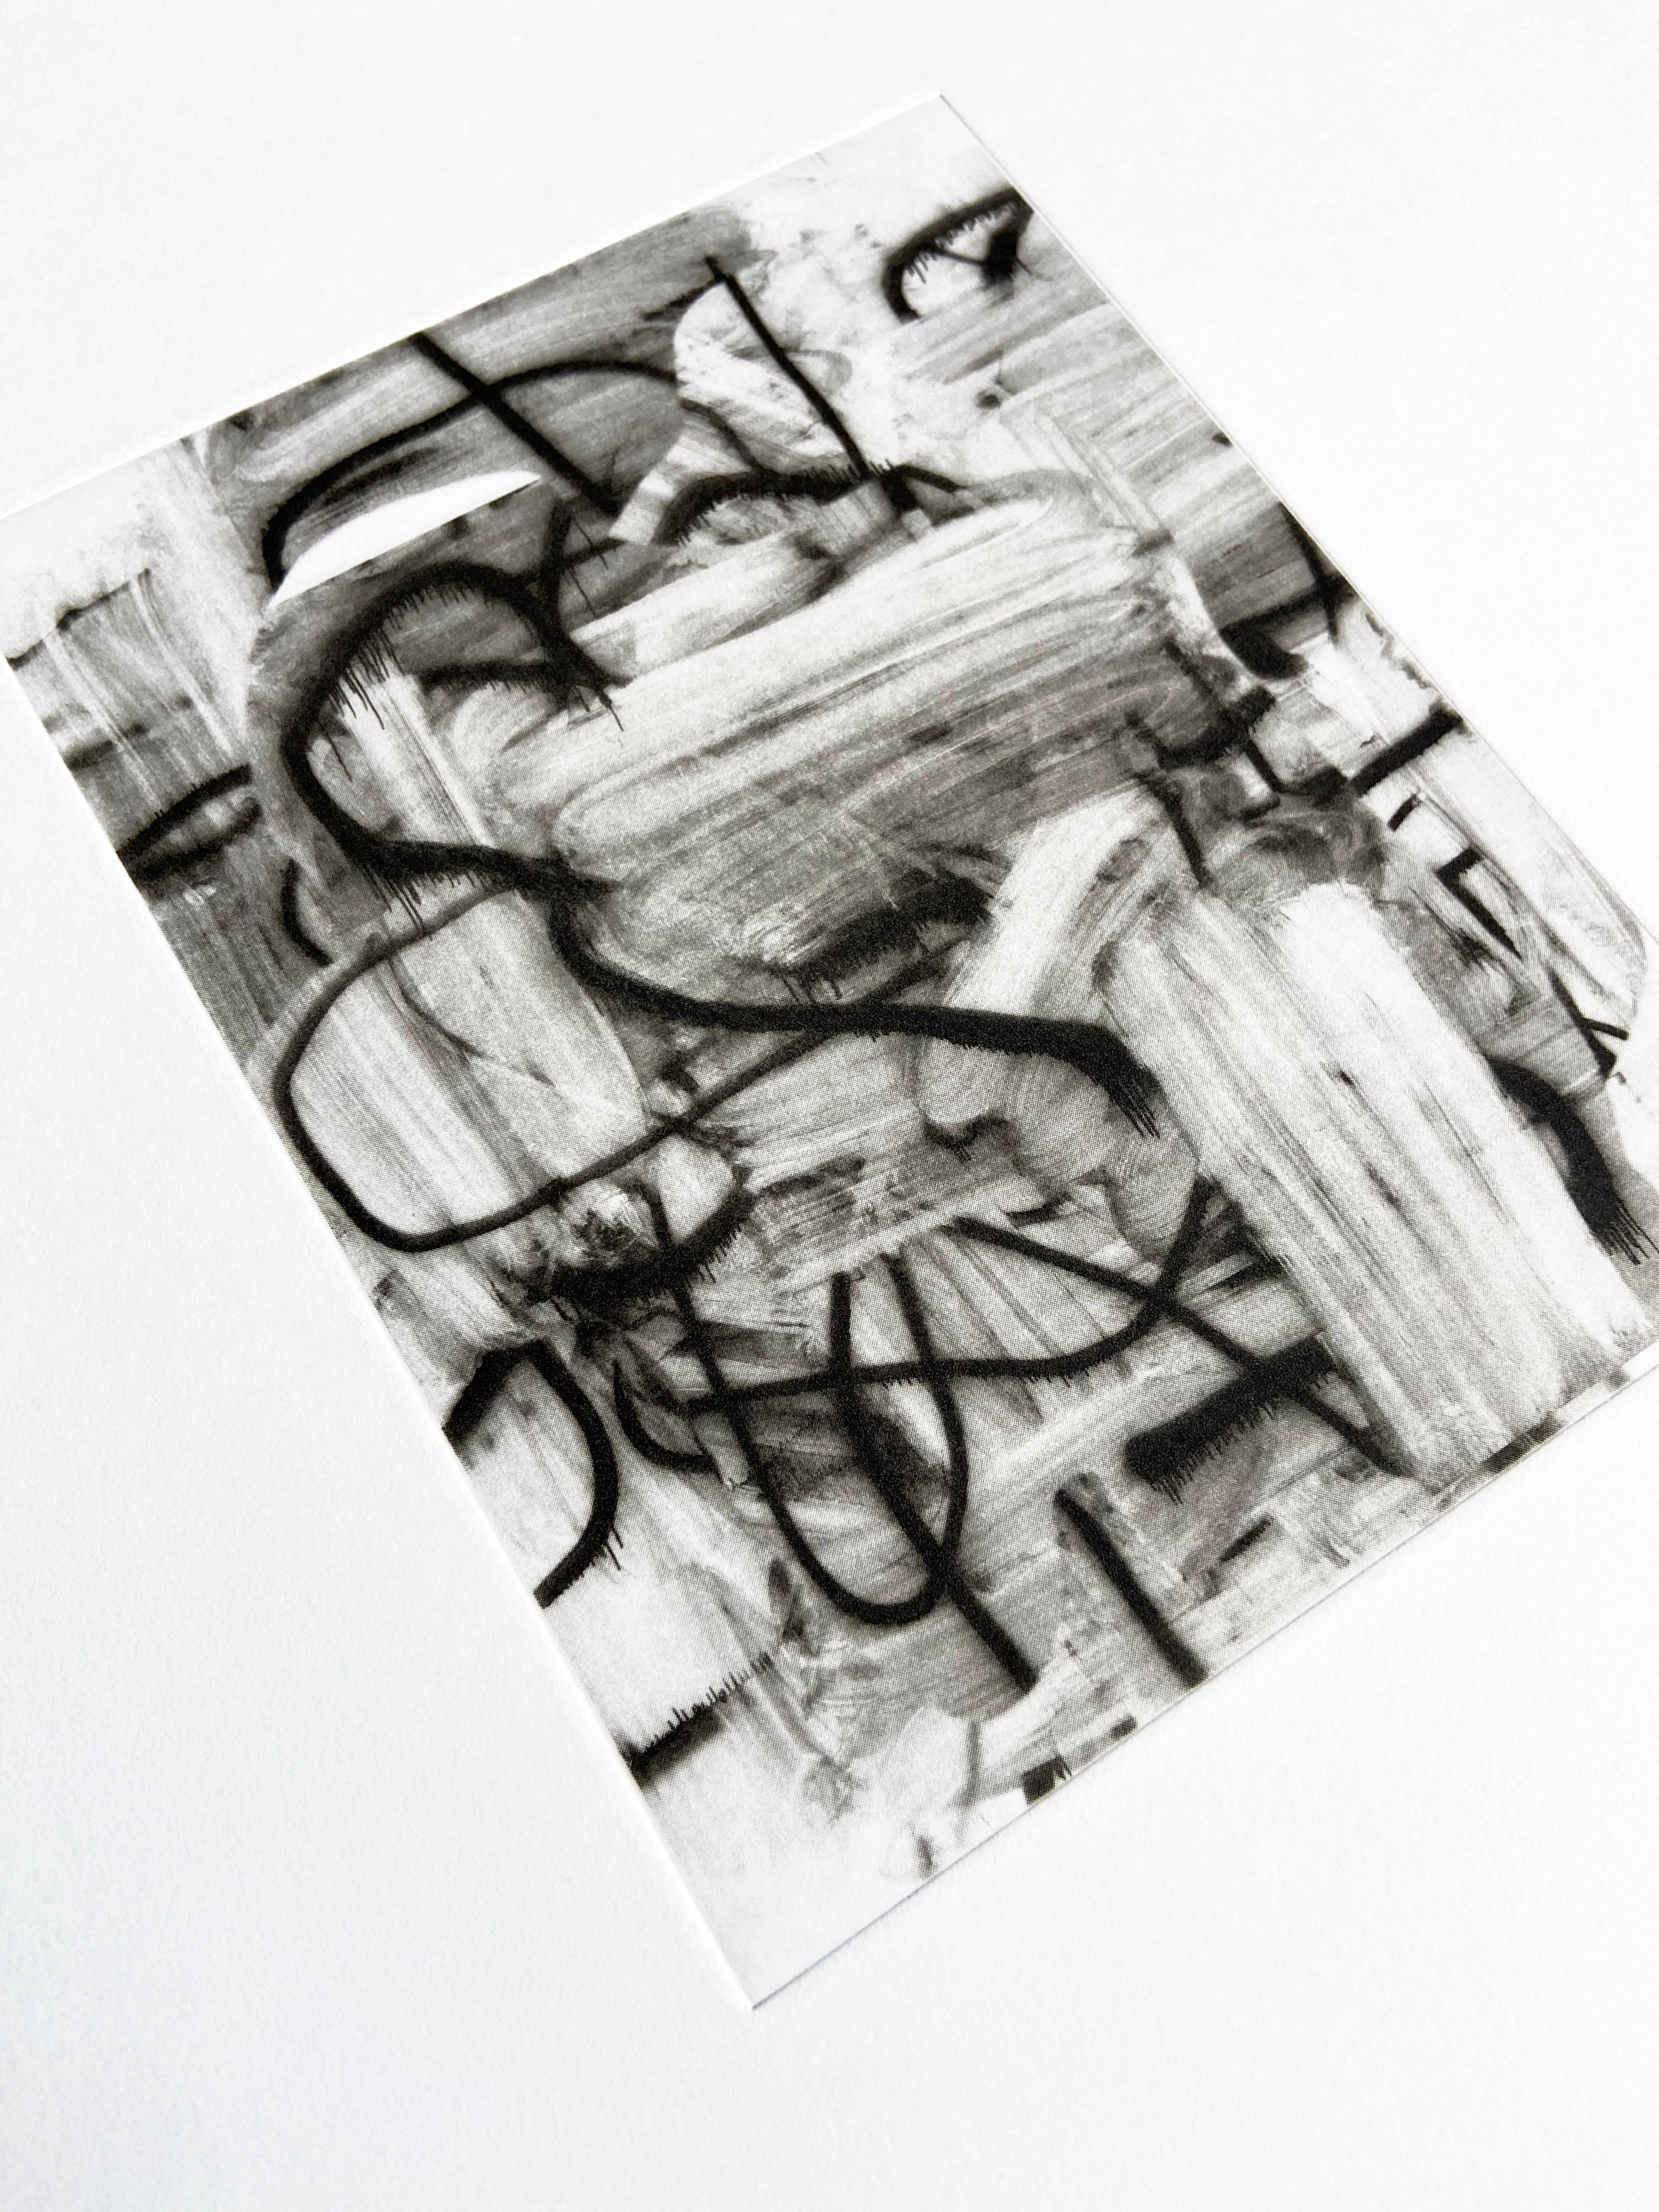 Untitled, 2009, Signed Photoengraving, Abstract Art, Contemporary Artist - Print by Christopher Wool